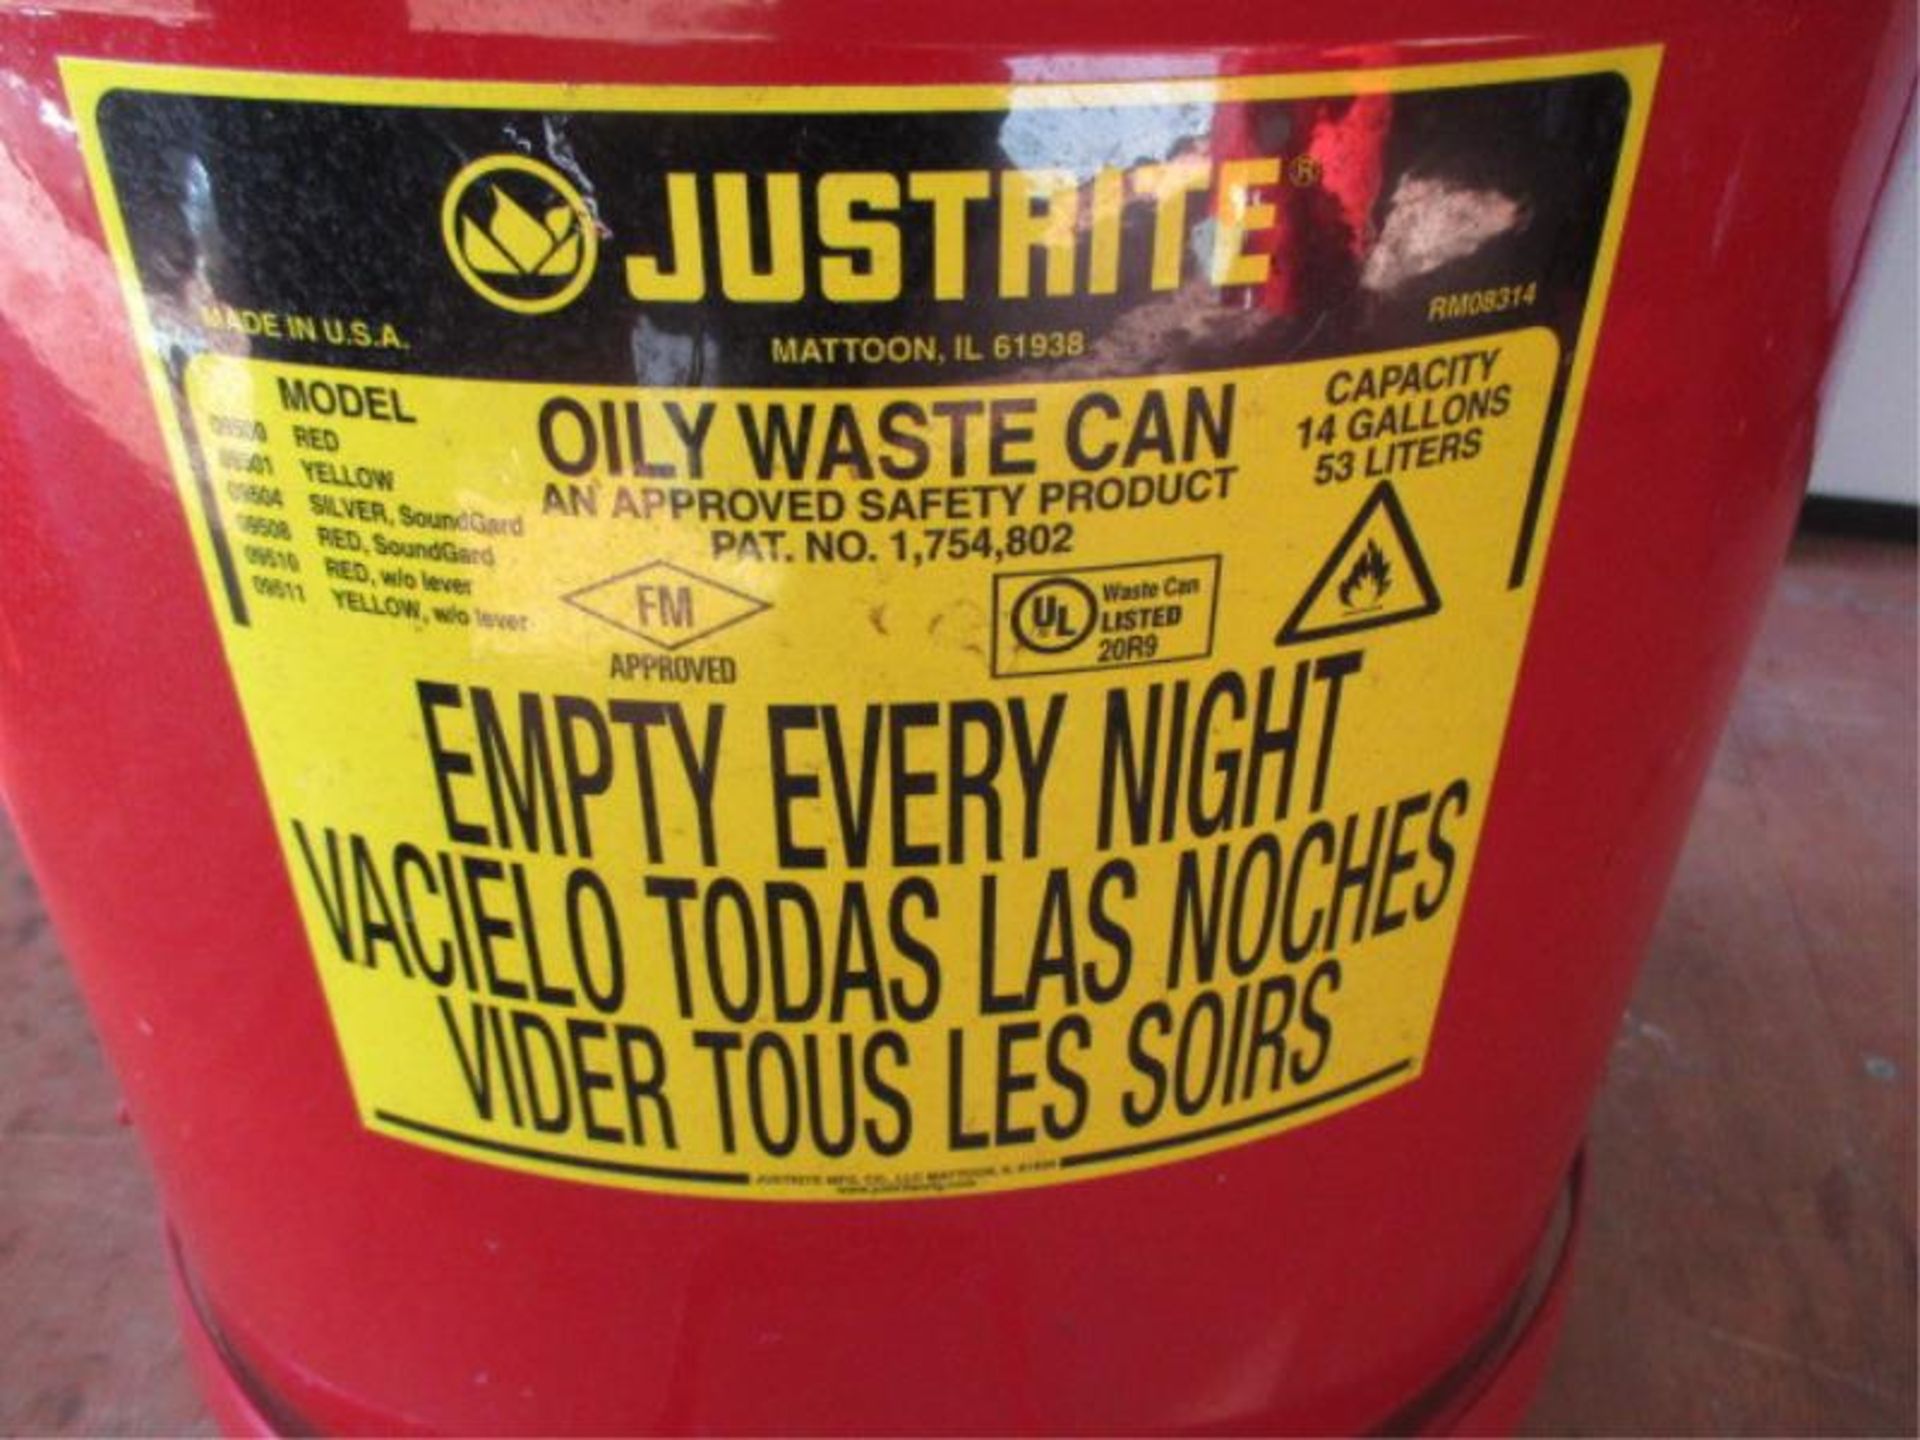 Justrite Oil Waste Can, Model: 09500, 14 Gallon, Metal, Red w/ Foot Pedal Lid Metal, Red w/ Foot - Image 4 of 7